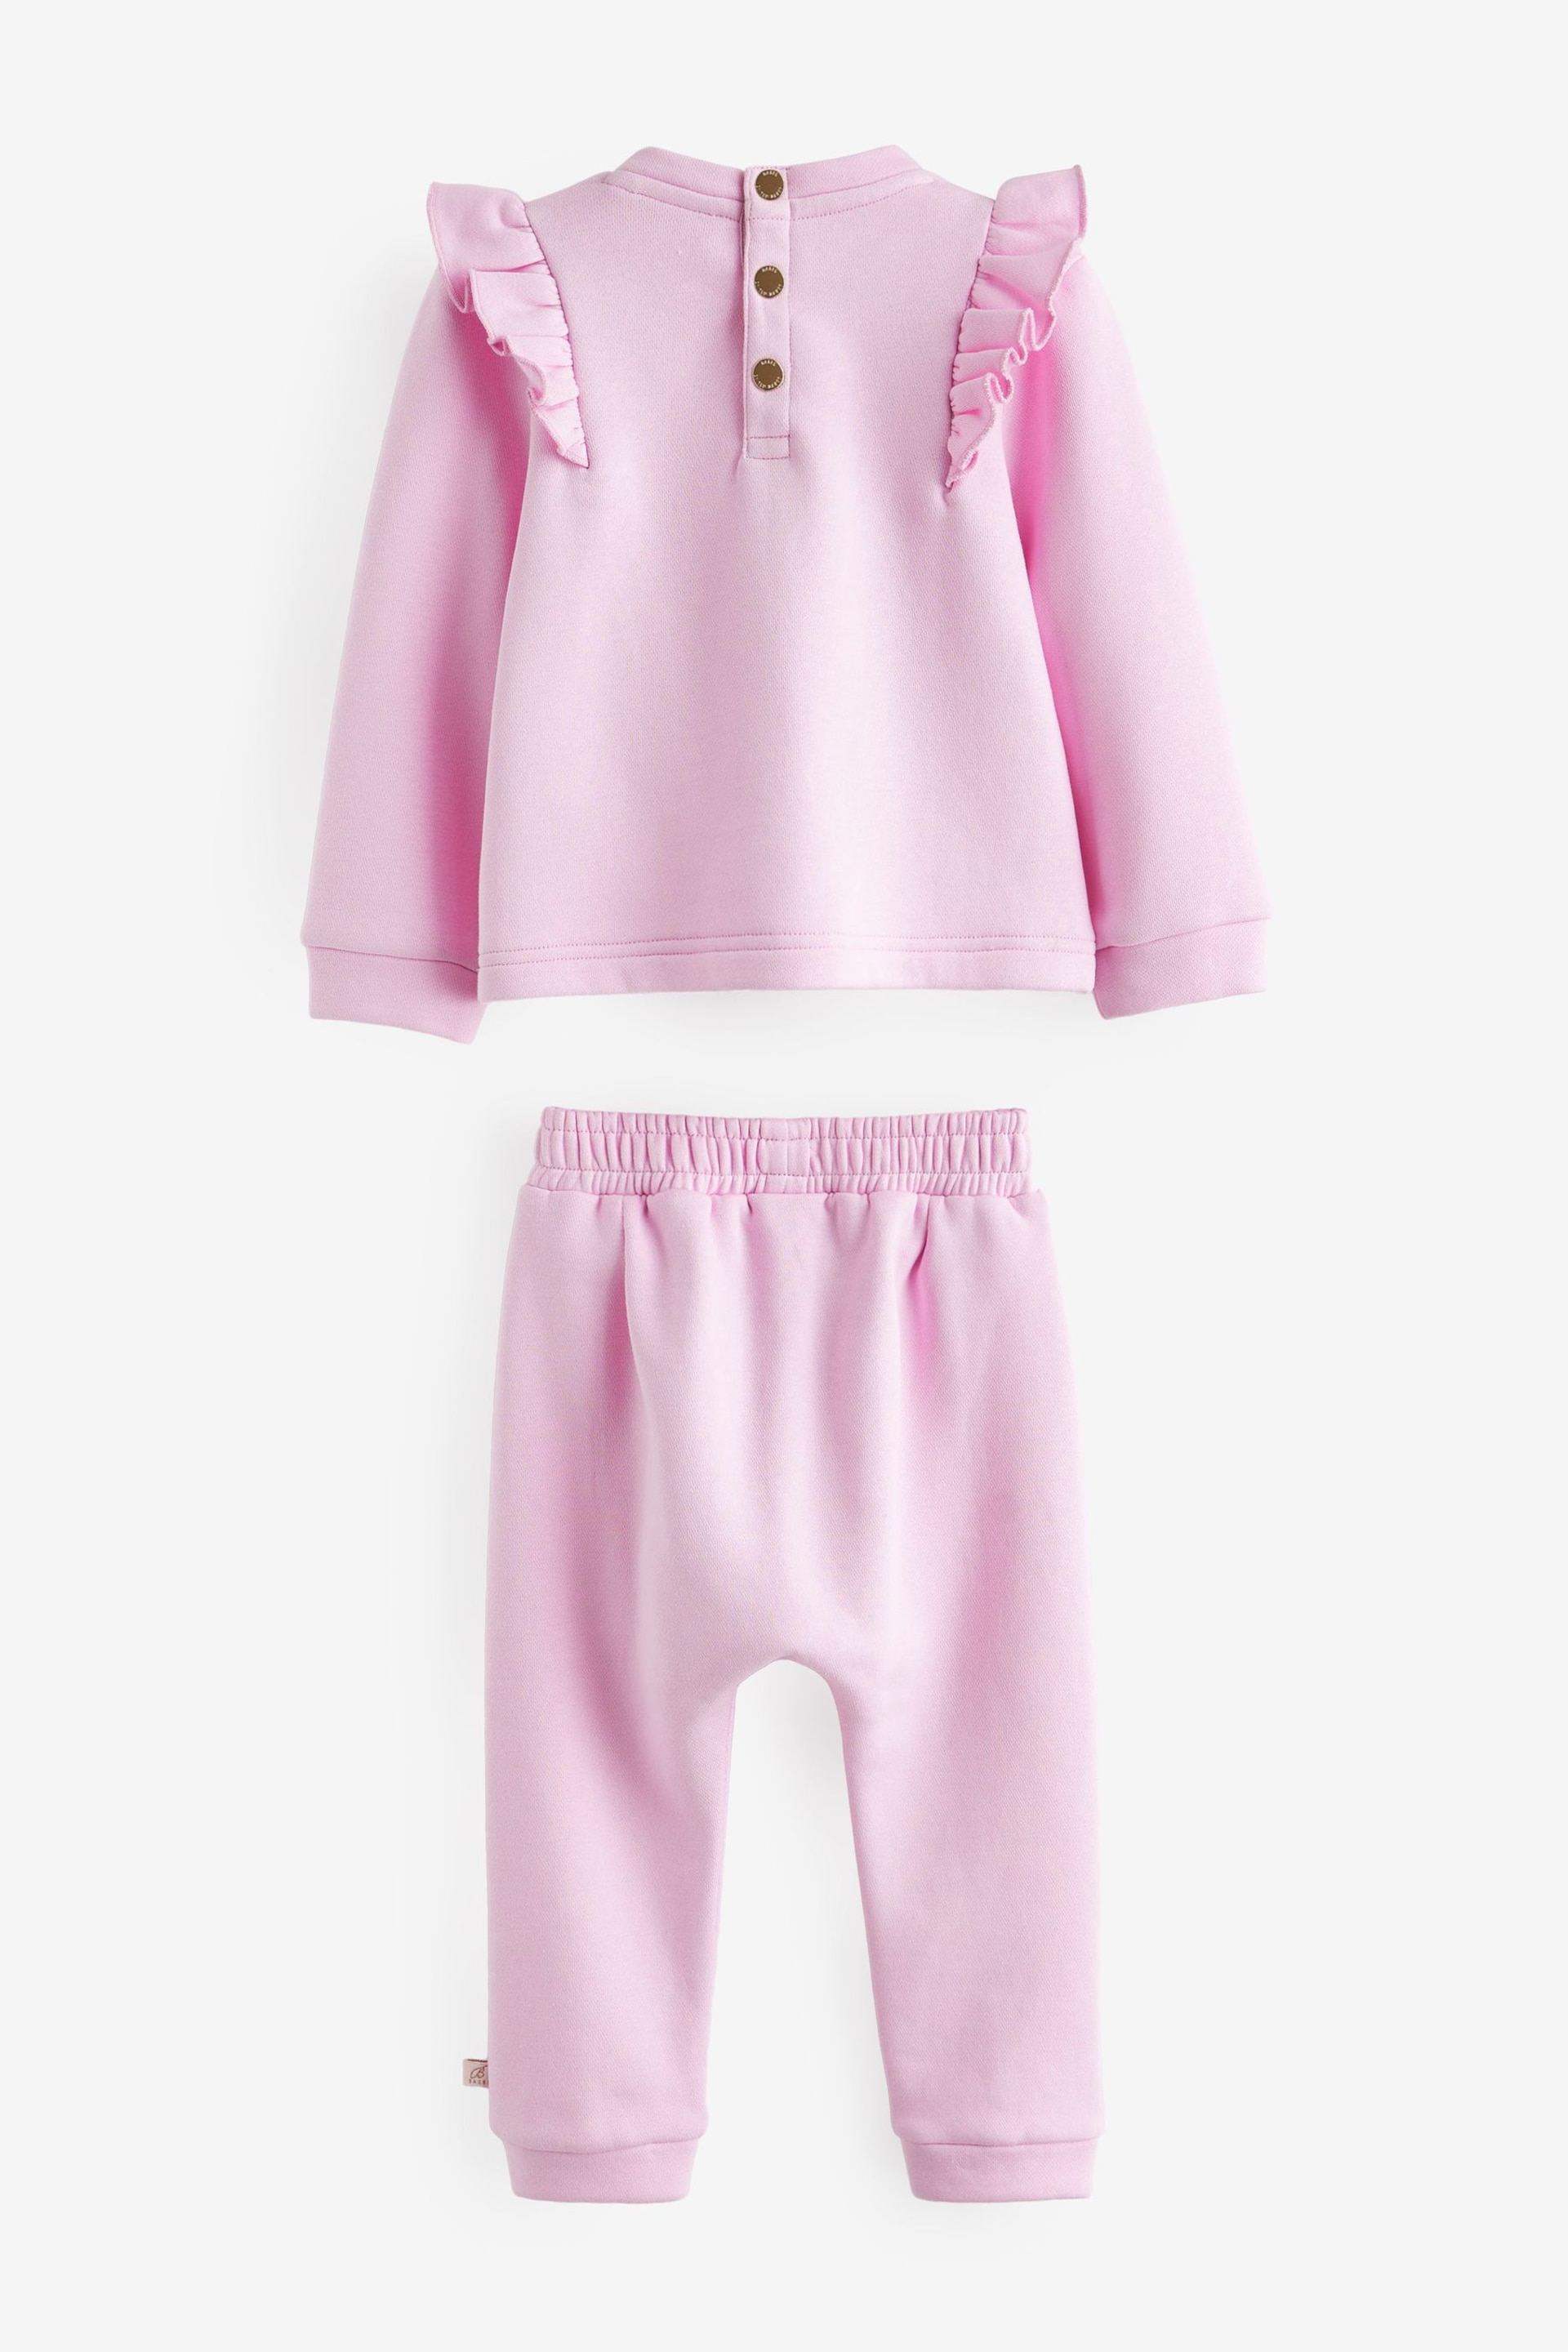 Baker by Ted Baker Pink Frill Sweater and Jogger Set - Image 2 of 4